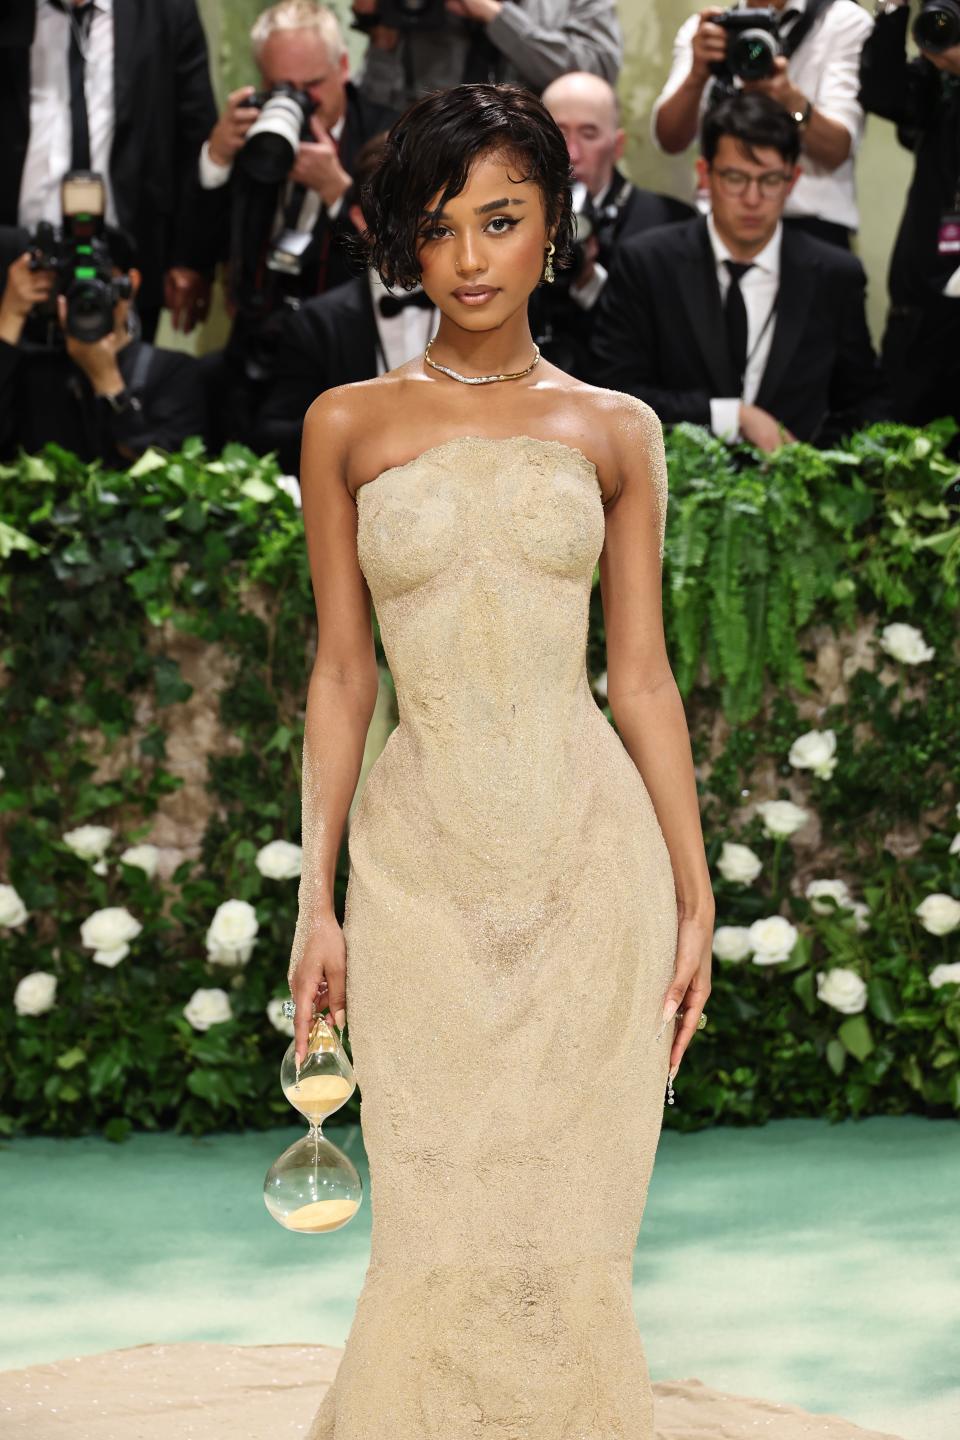 Tyla nodded to the “time” element of the show with her Balmain gown, which was actually made from sand. (Get it? Sands of time?) Don't miss the hourglass bag!